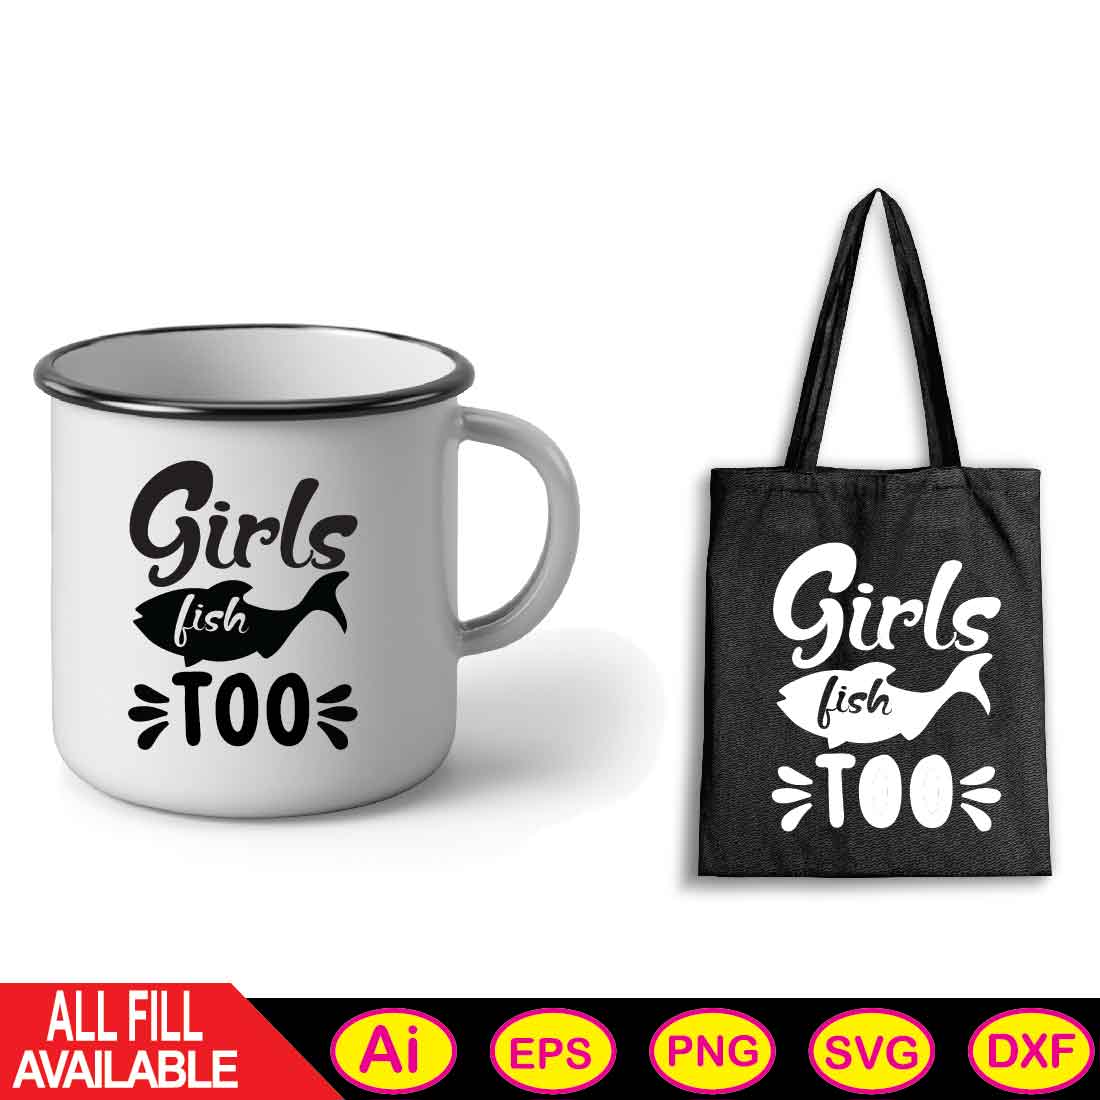 A white and black coffee mug with a black bag next to it.